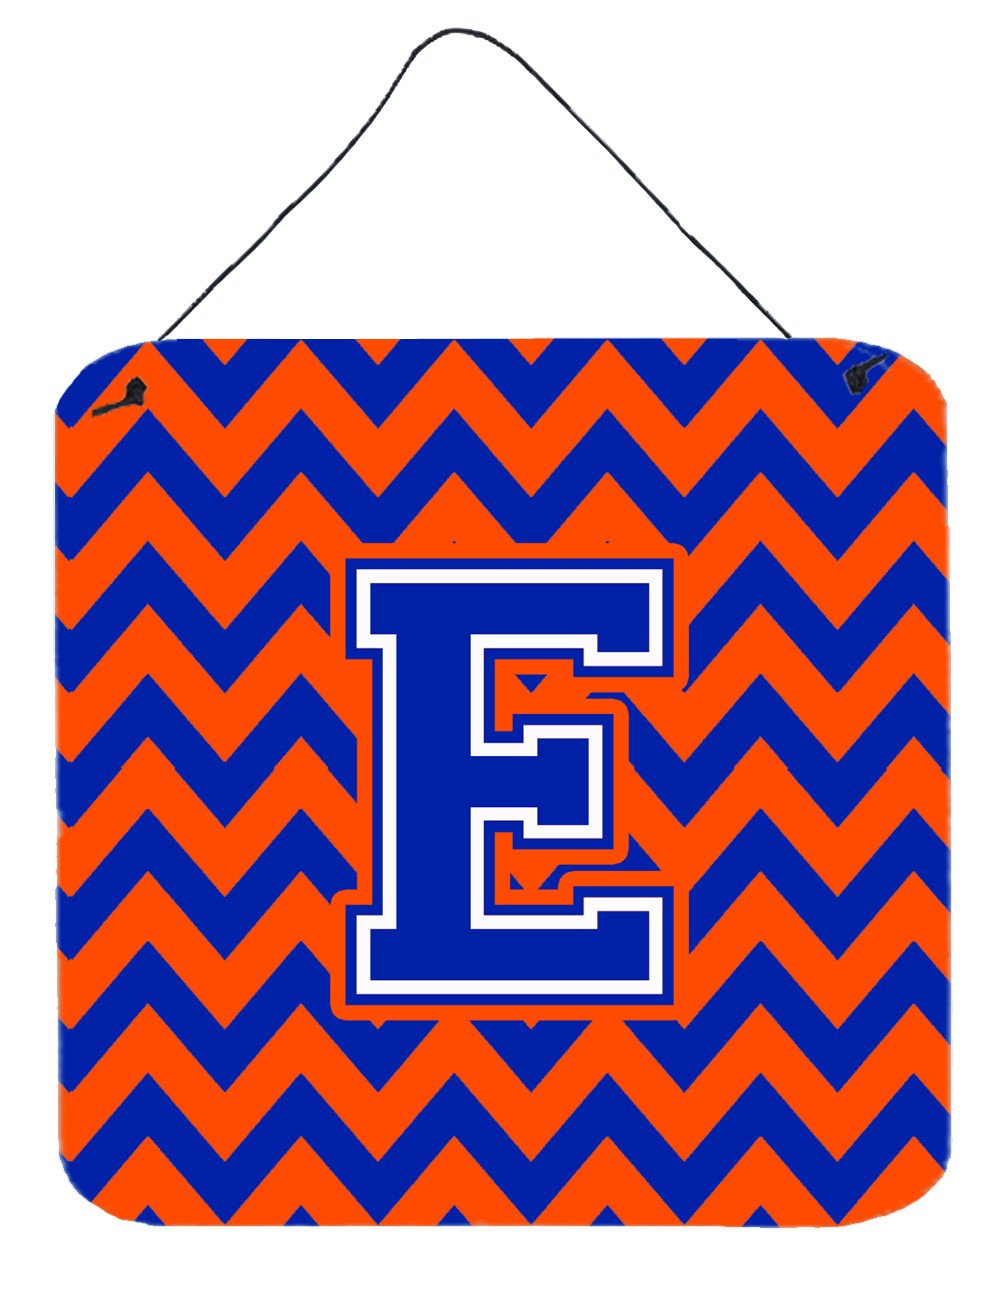 Letter E Chevron Orange and Blue Wall or Door Hanging Prints CJ1044-EDS66 by Caroline's Treasures